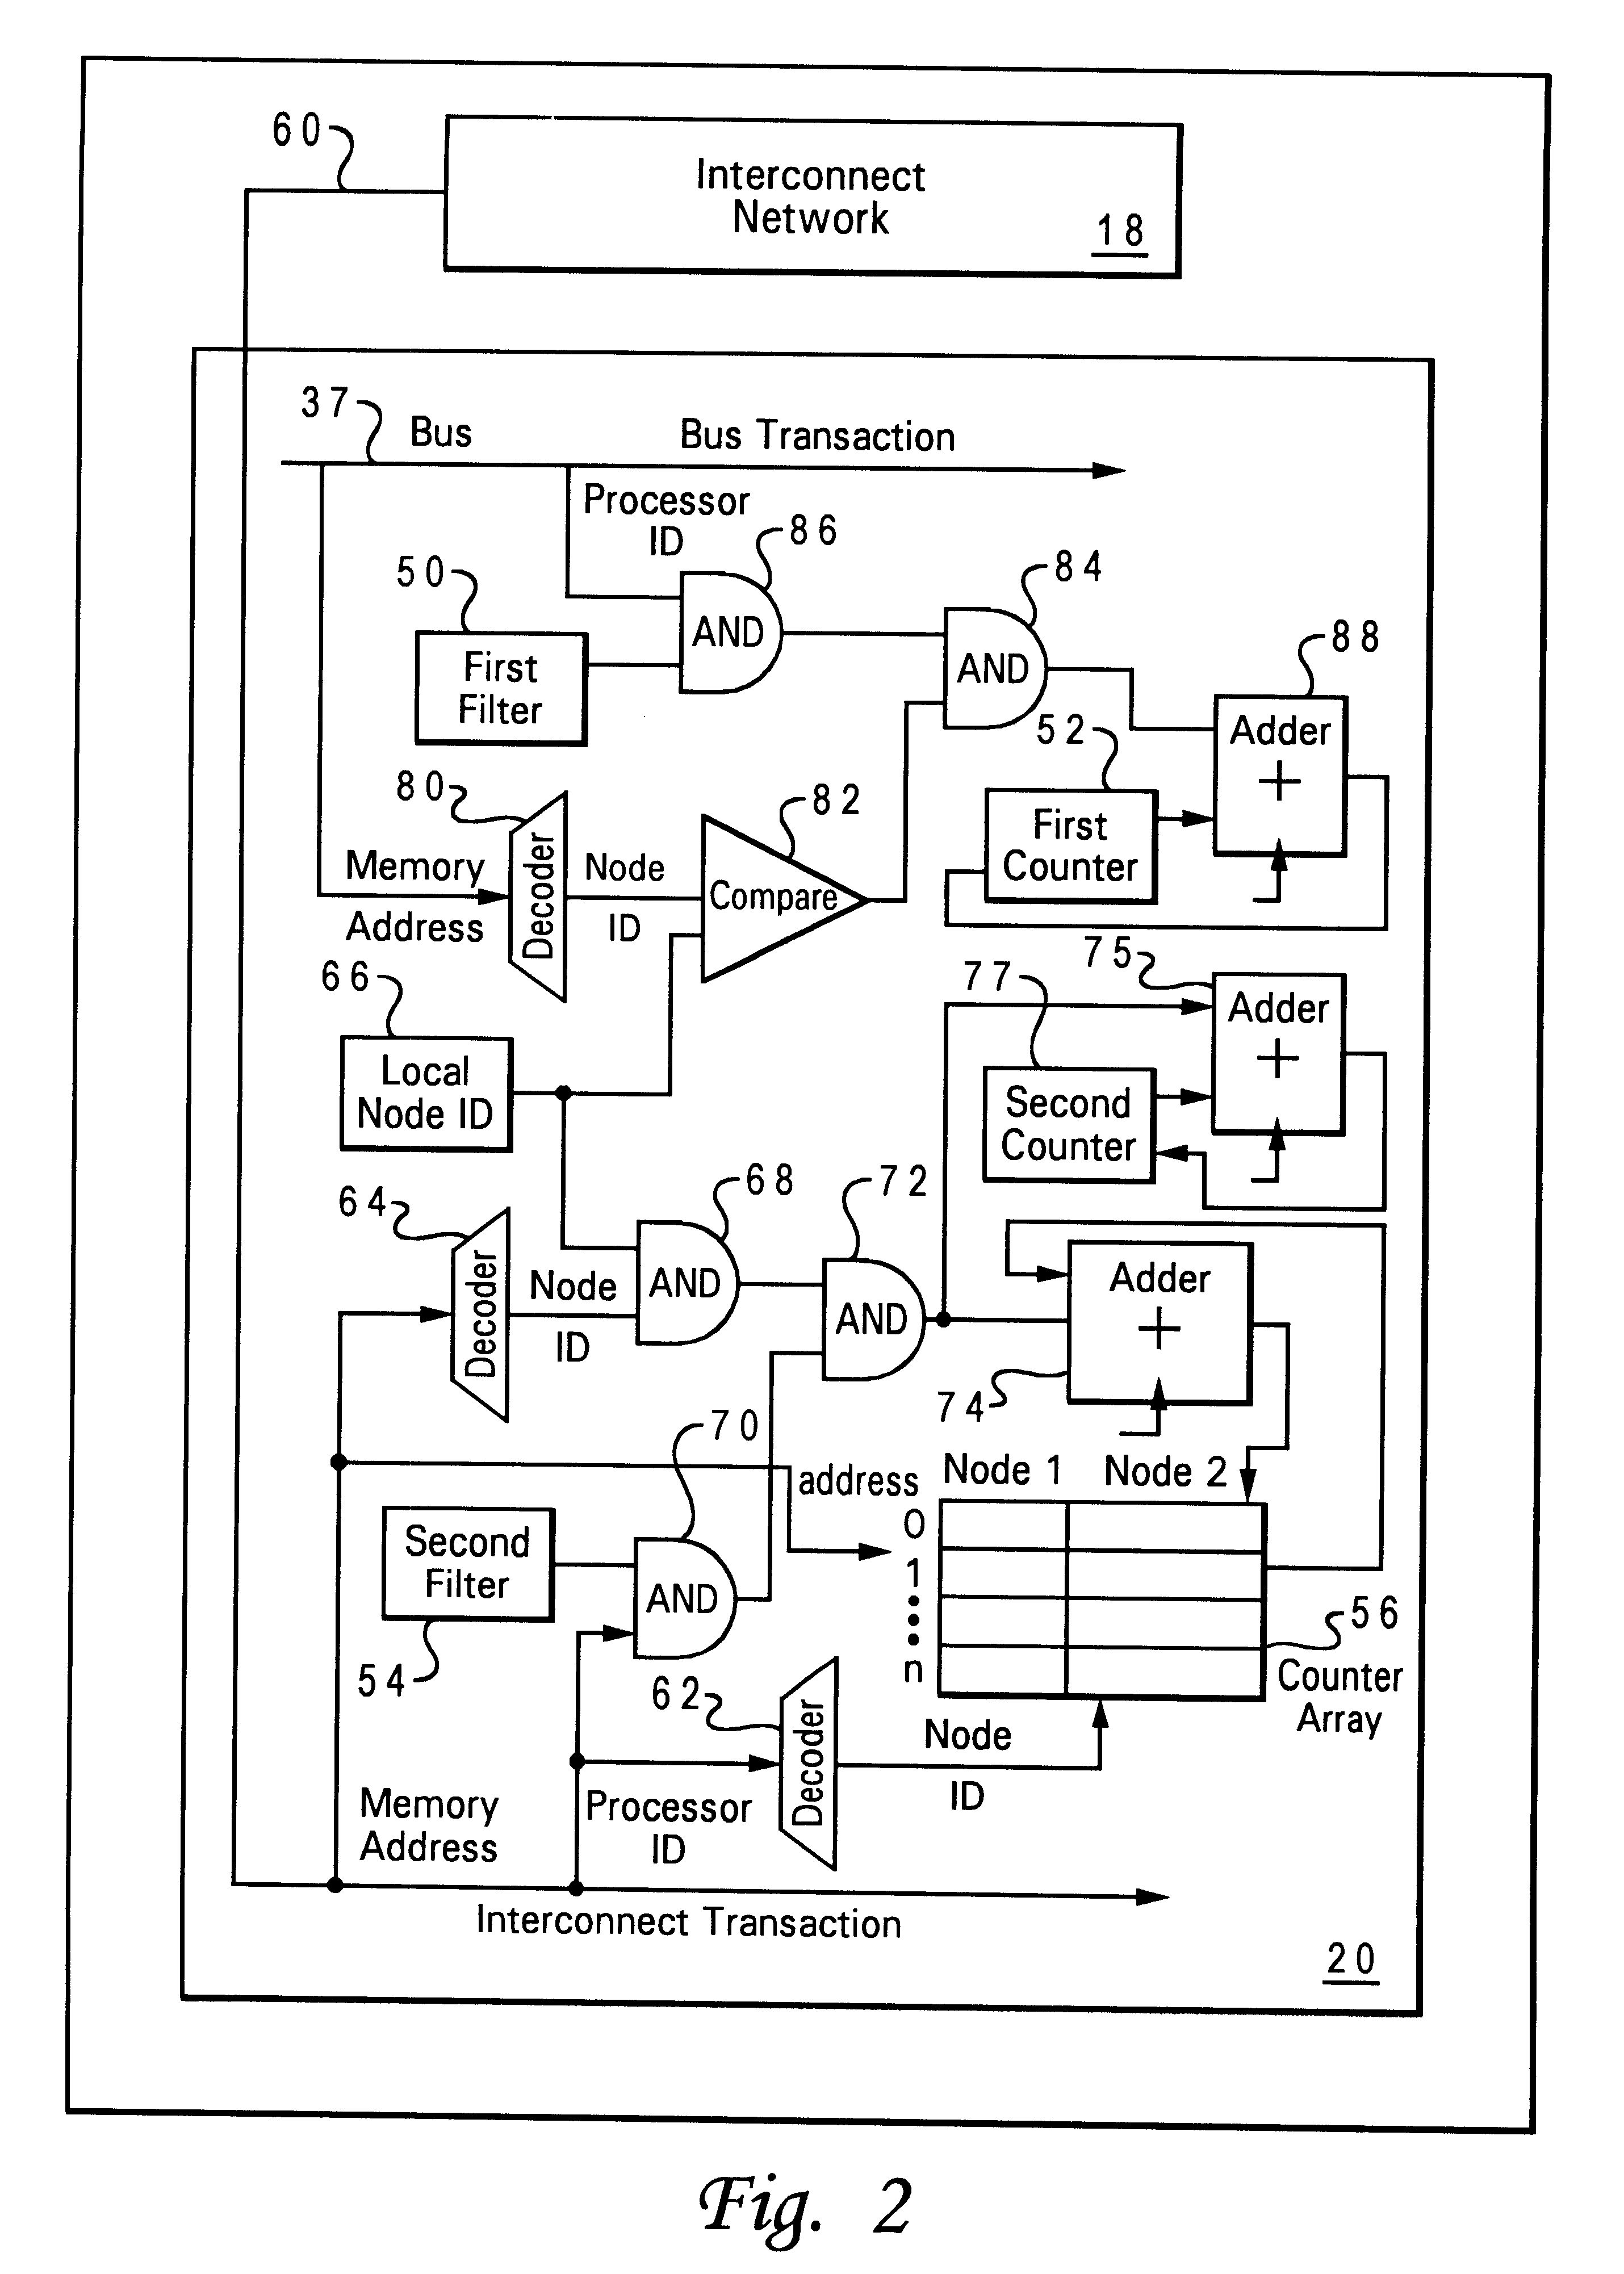 Method and system in a distributed shared-memory data processing system for determining utilization of shared-memory included within nodes by a designated application